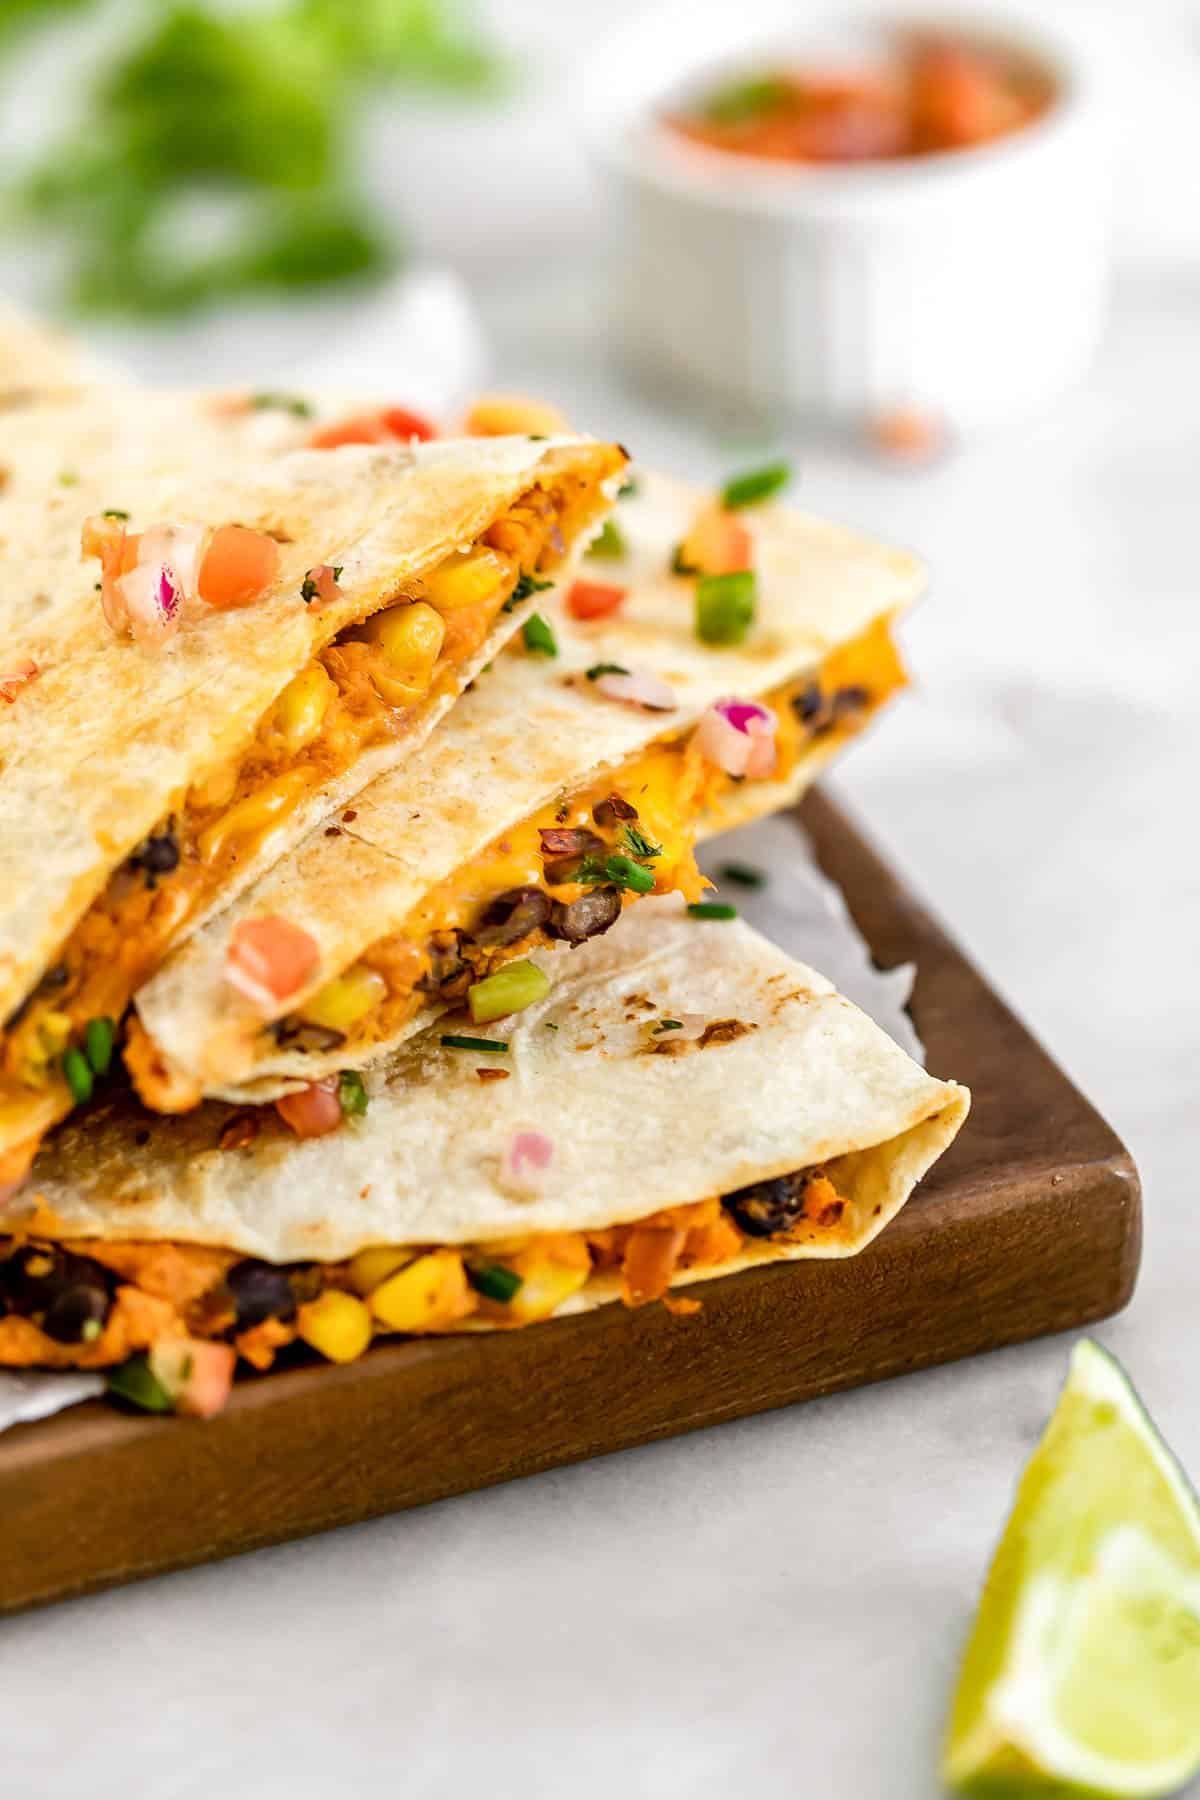 vegan quesadillas with sweet potato, black beans and cheese